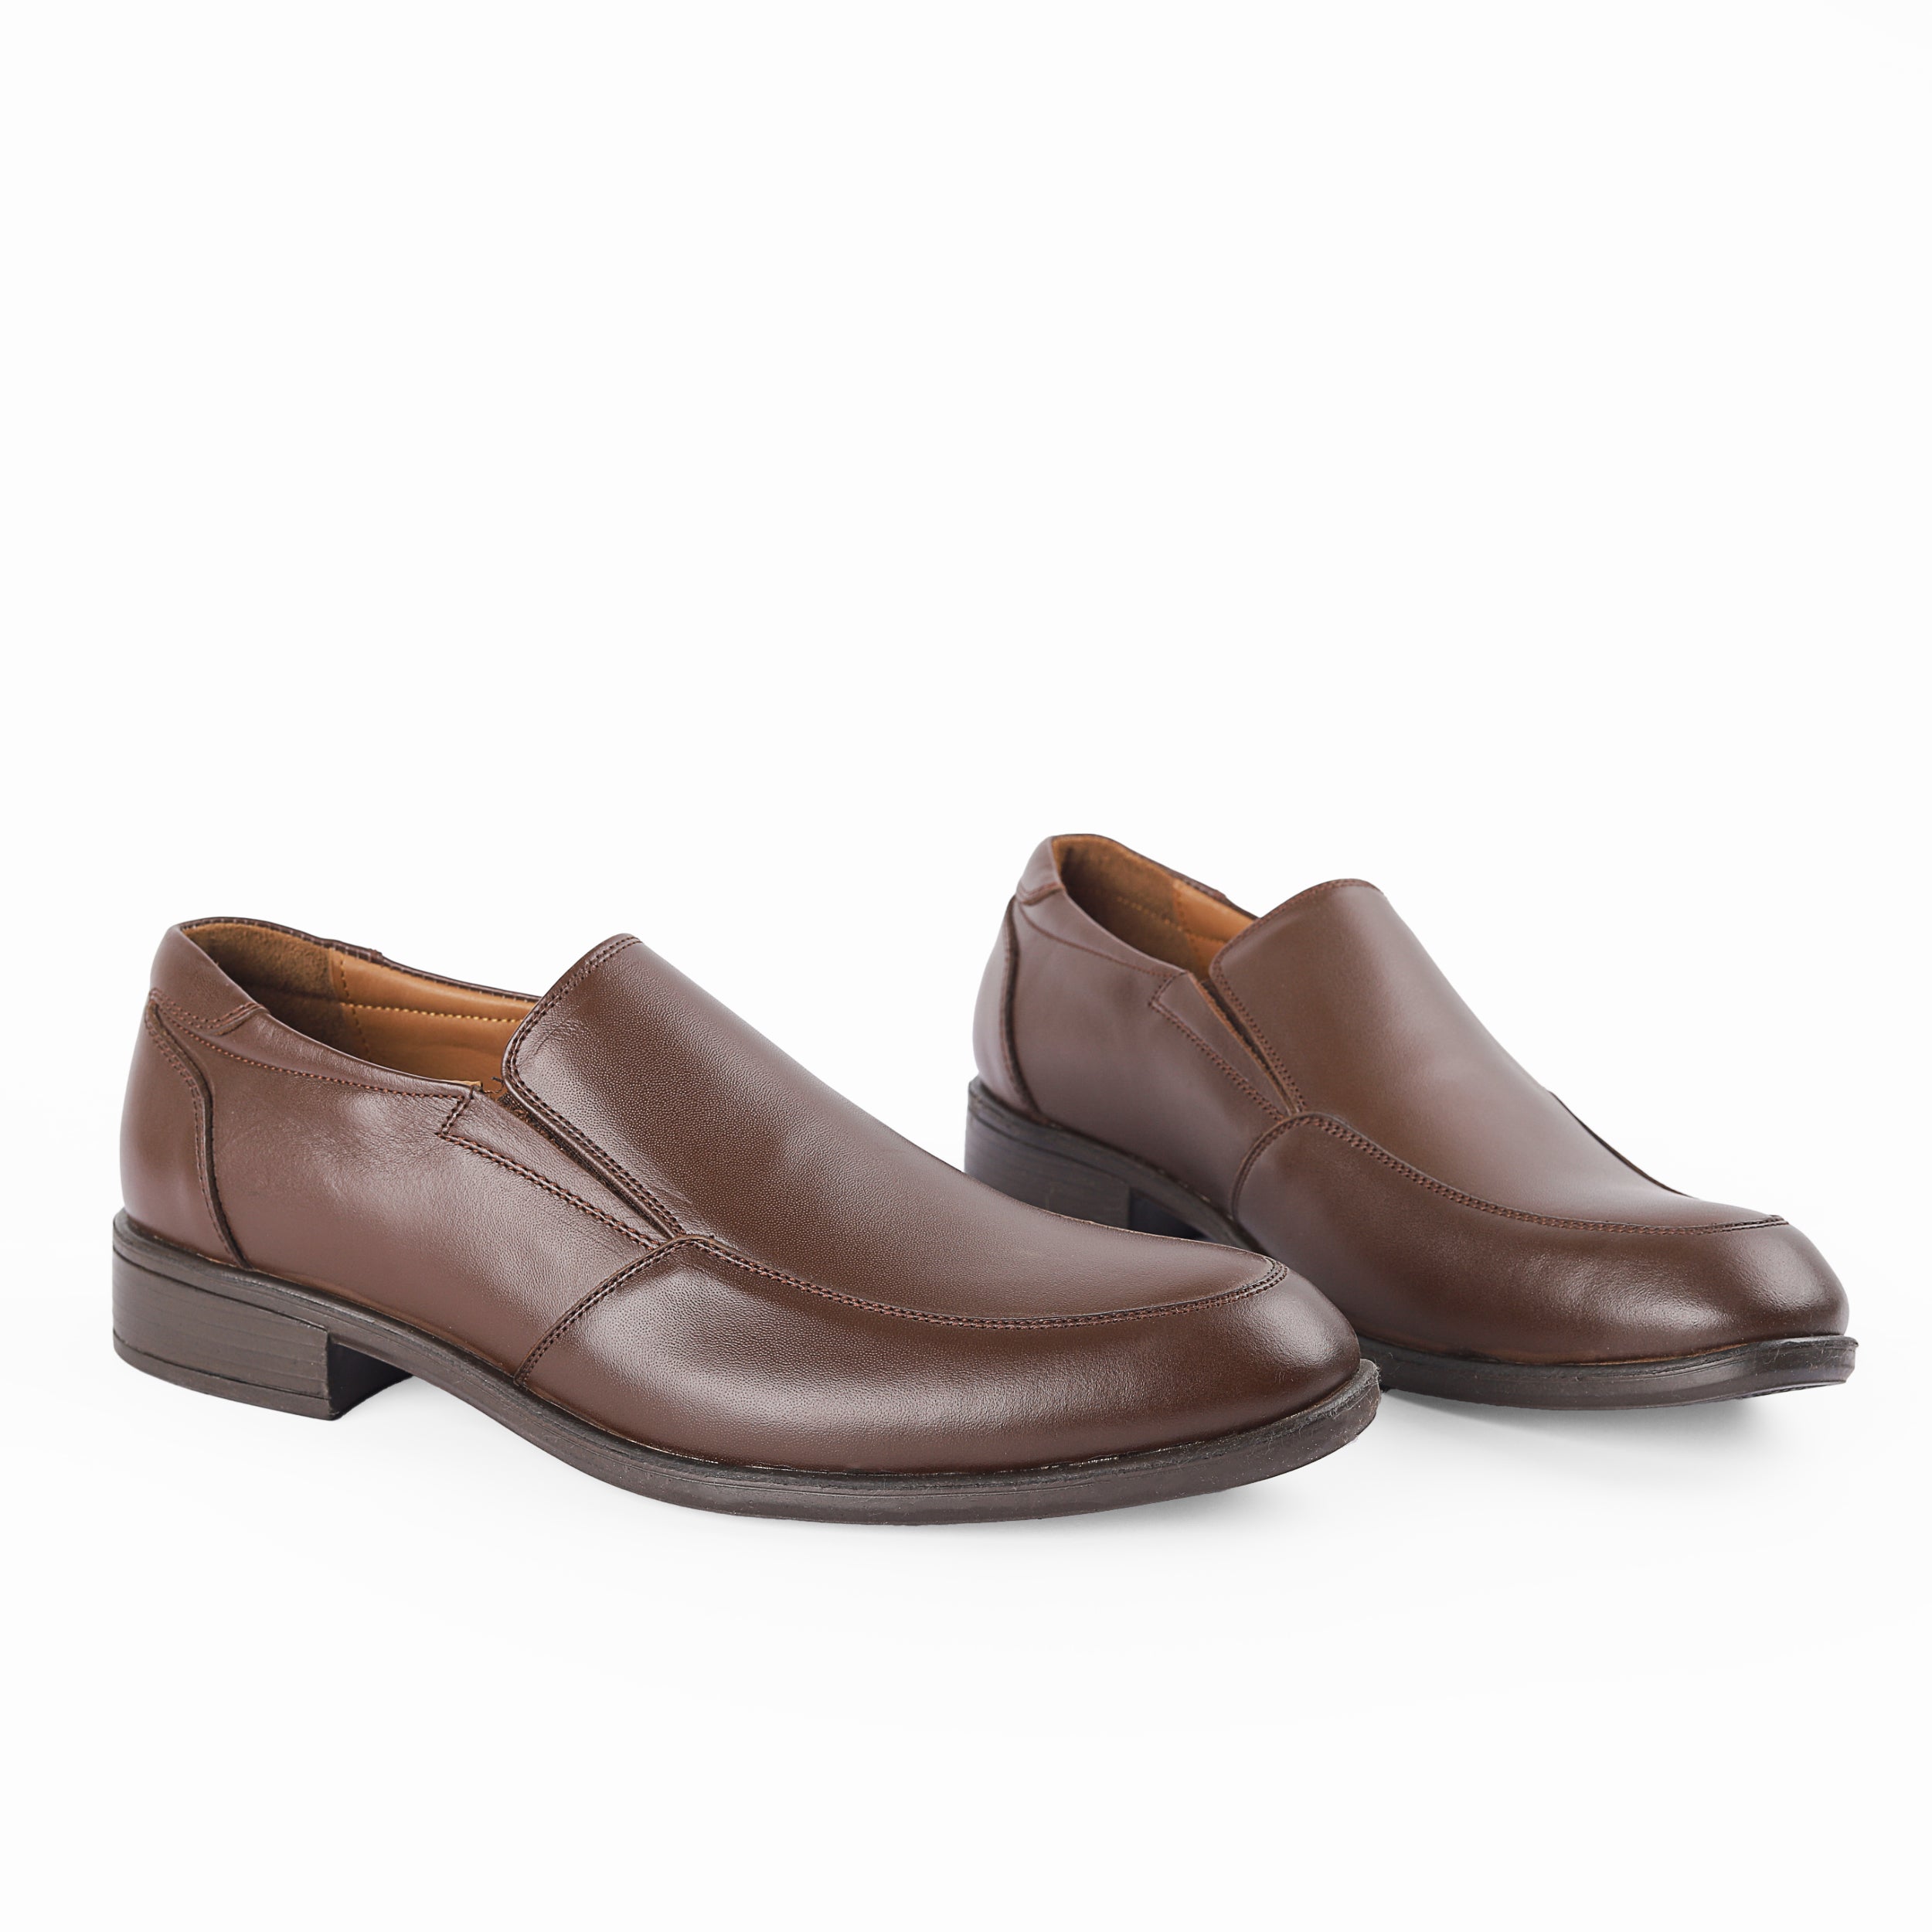 Lotfy Classic Shoes For Men 6755013